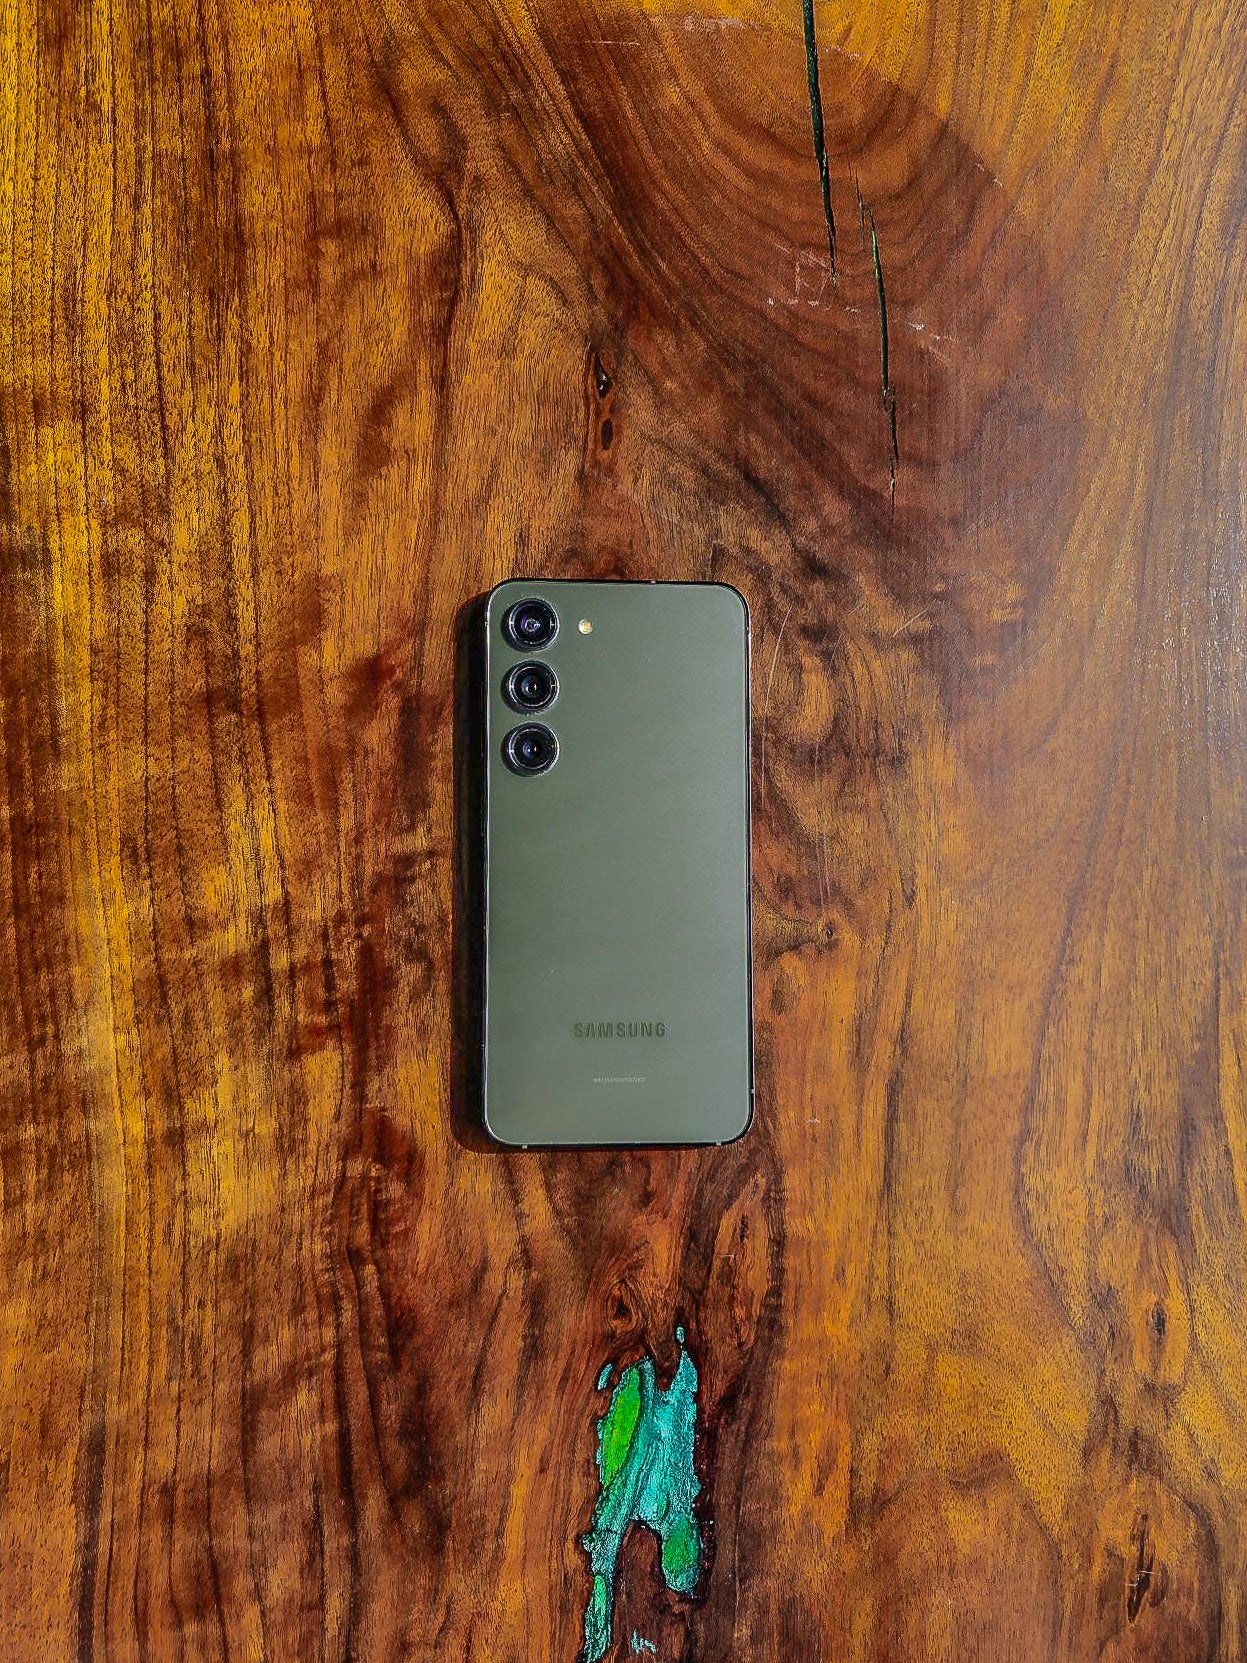 Olive green Samsung smartphone with triple camera setup on a rich wooden background.